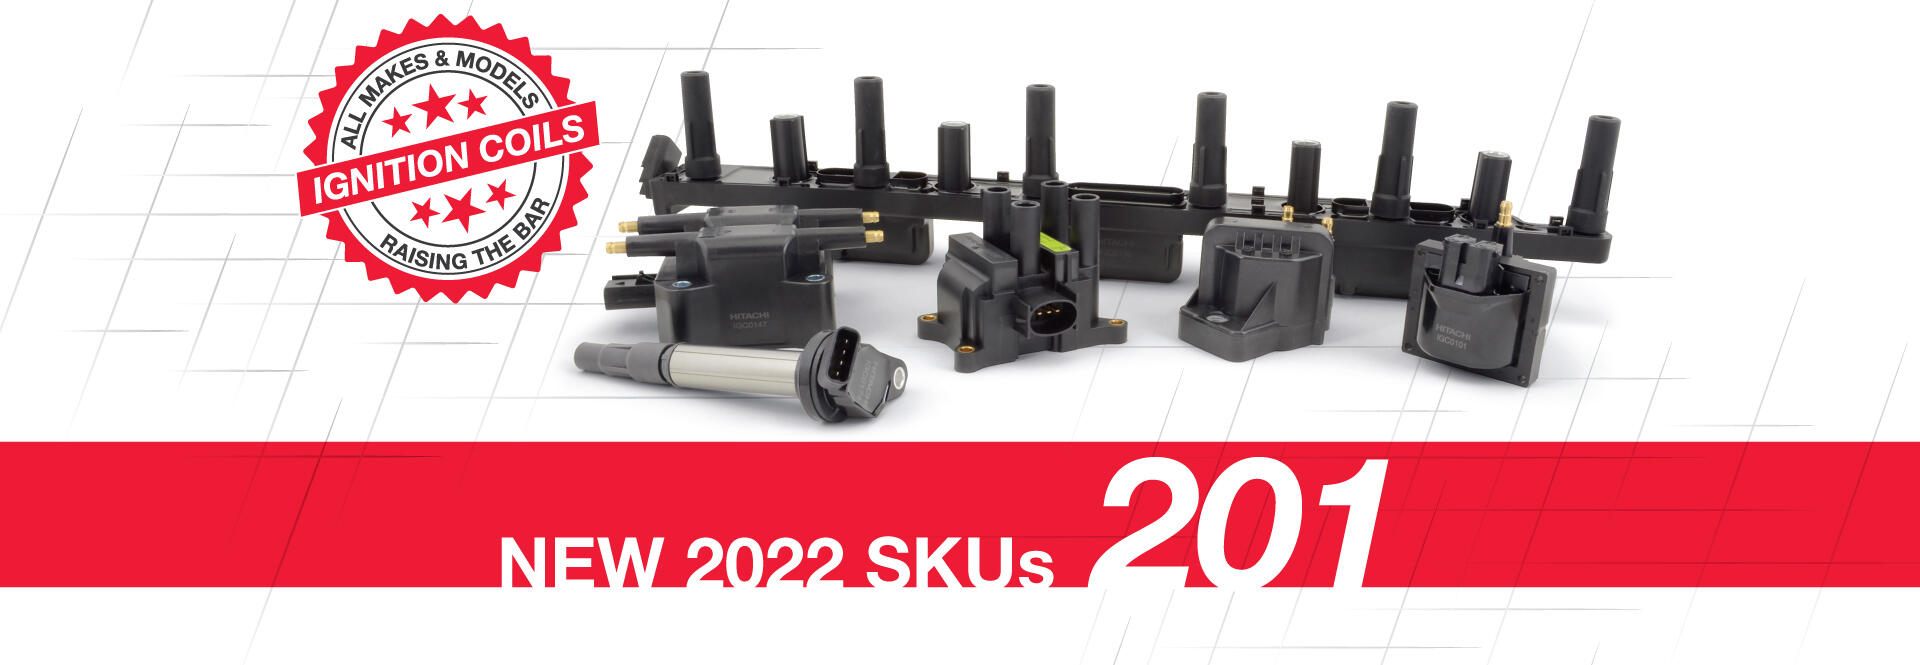 201 Ignition Coils Launched in 2022